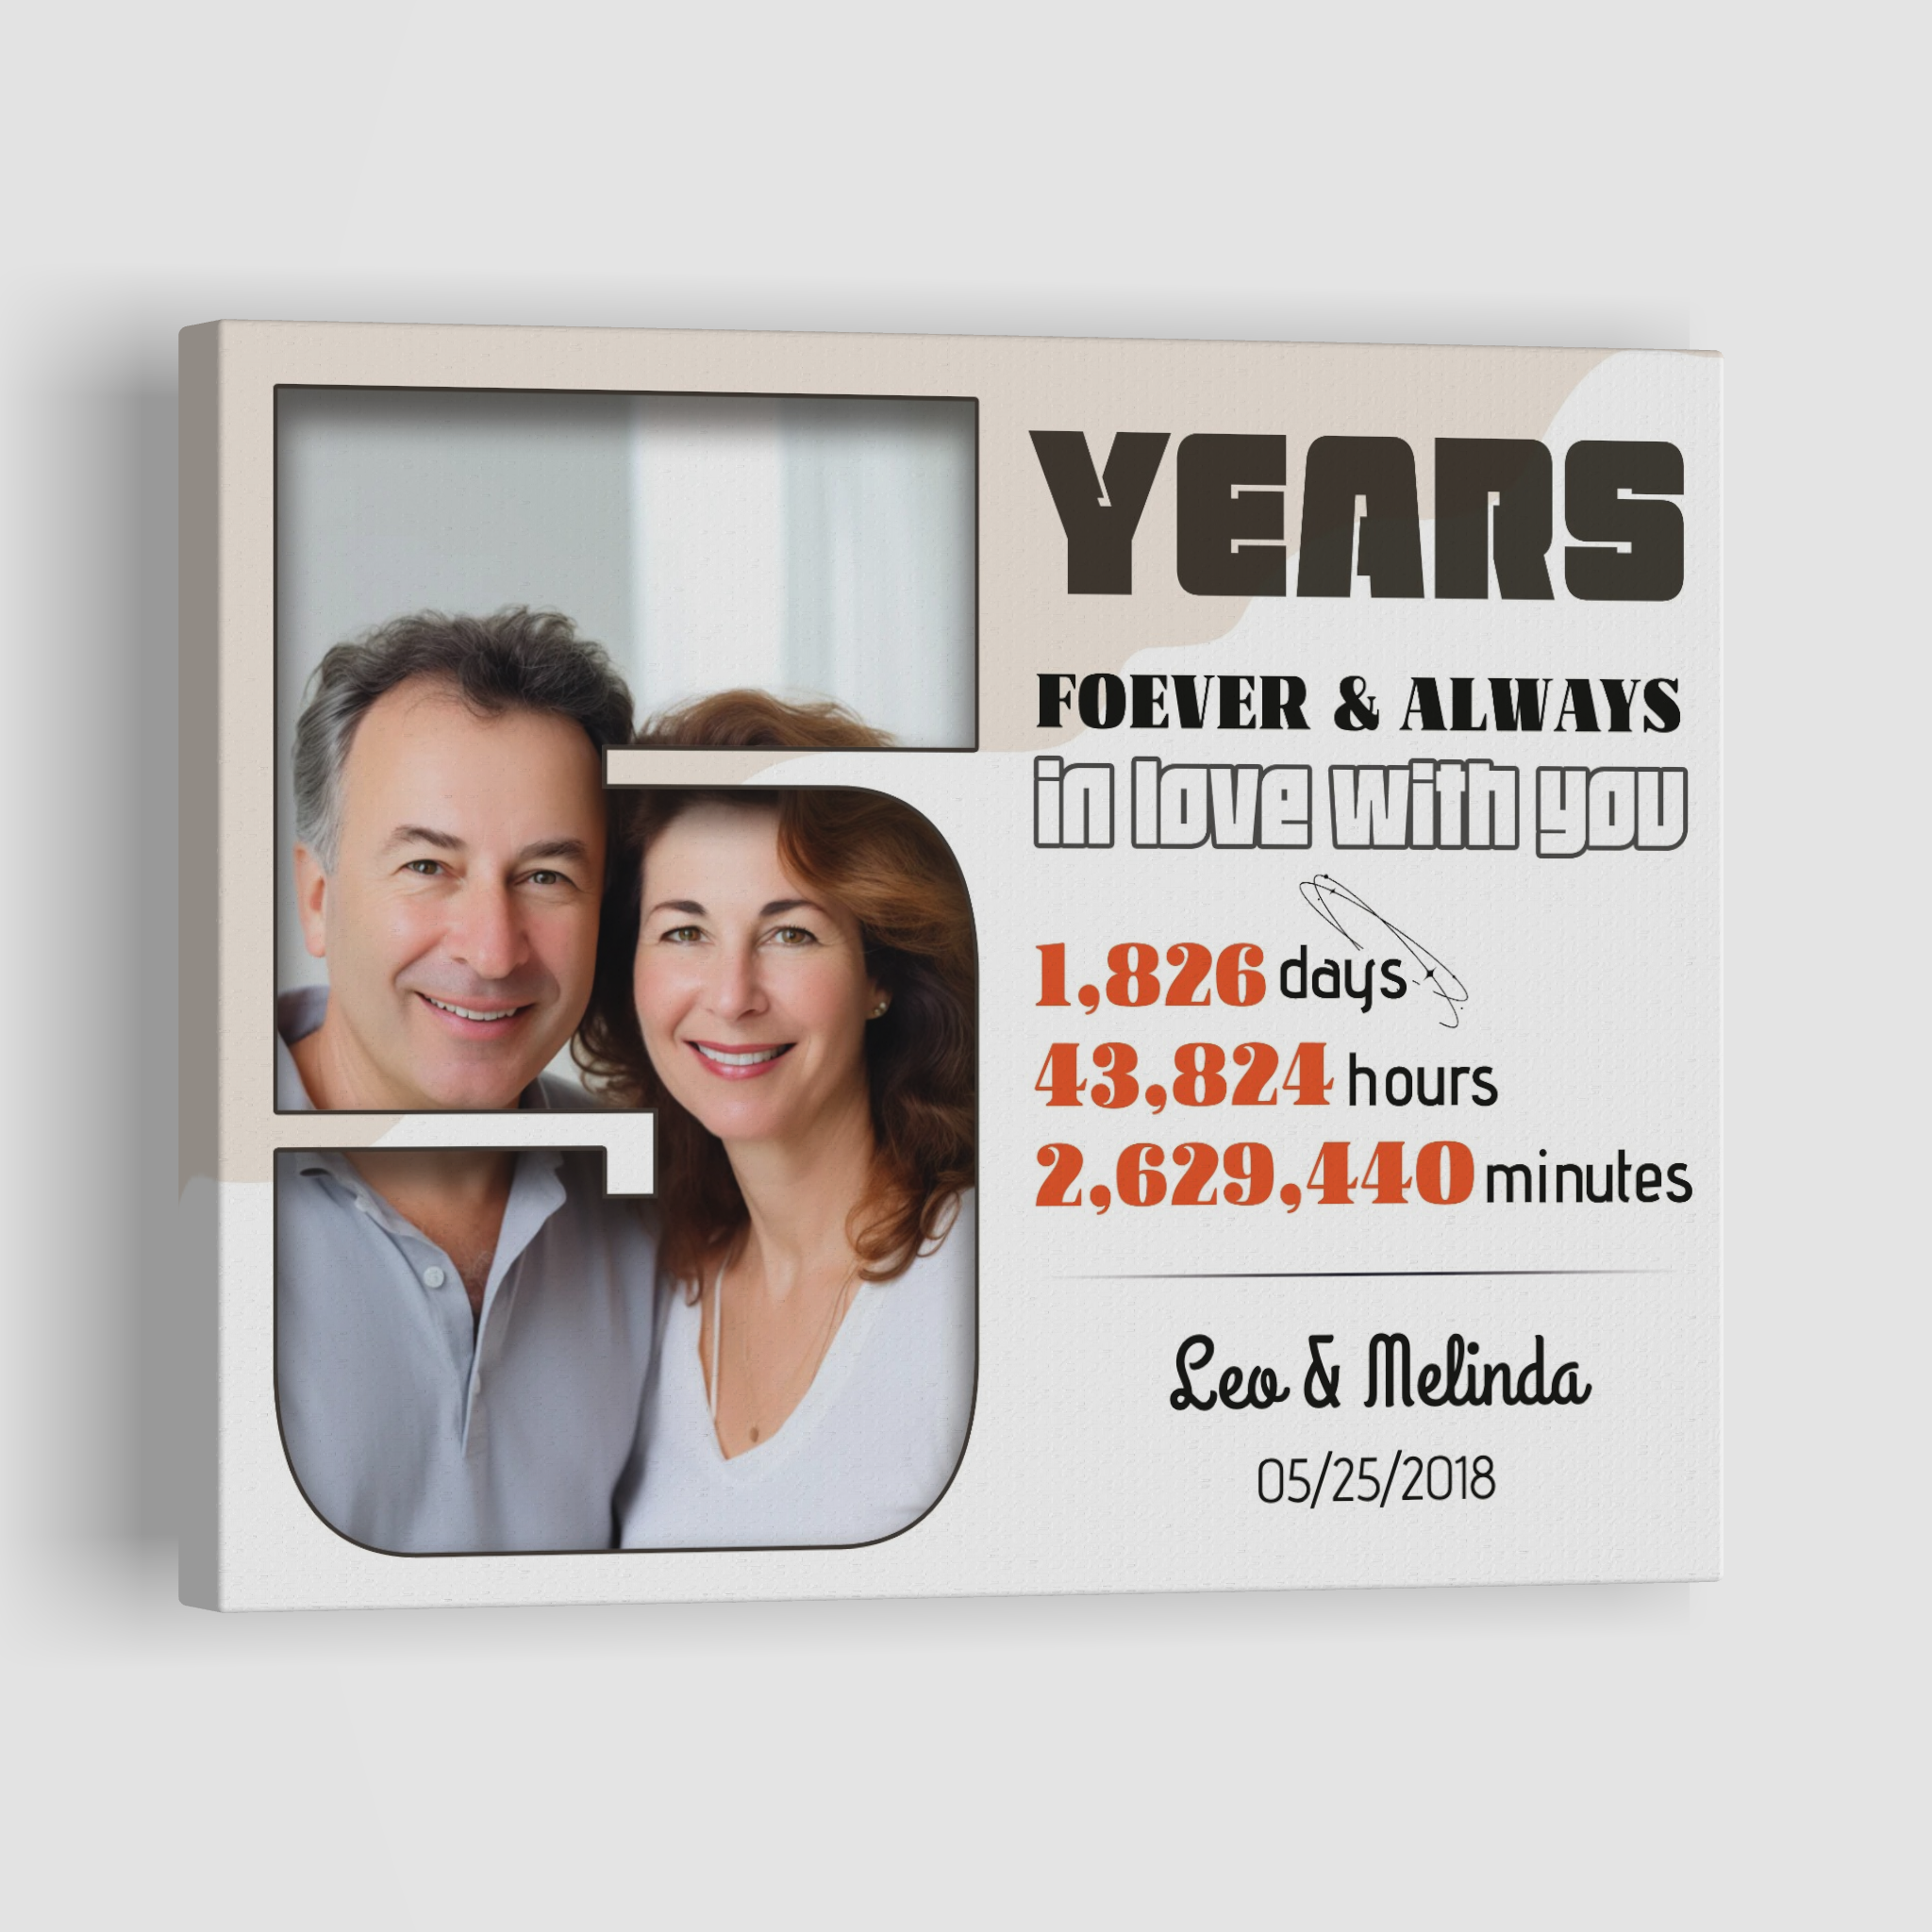 Forever and Always - 5 Year Anniversary Canvas Print